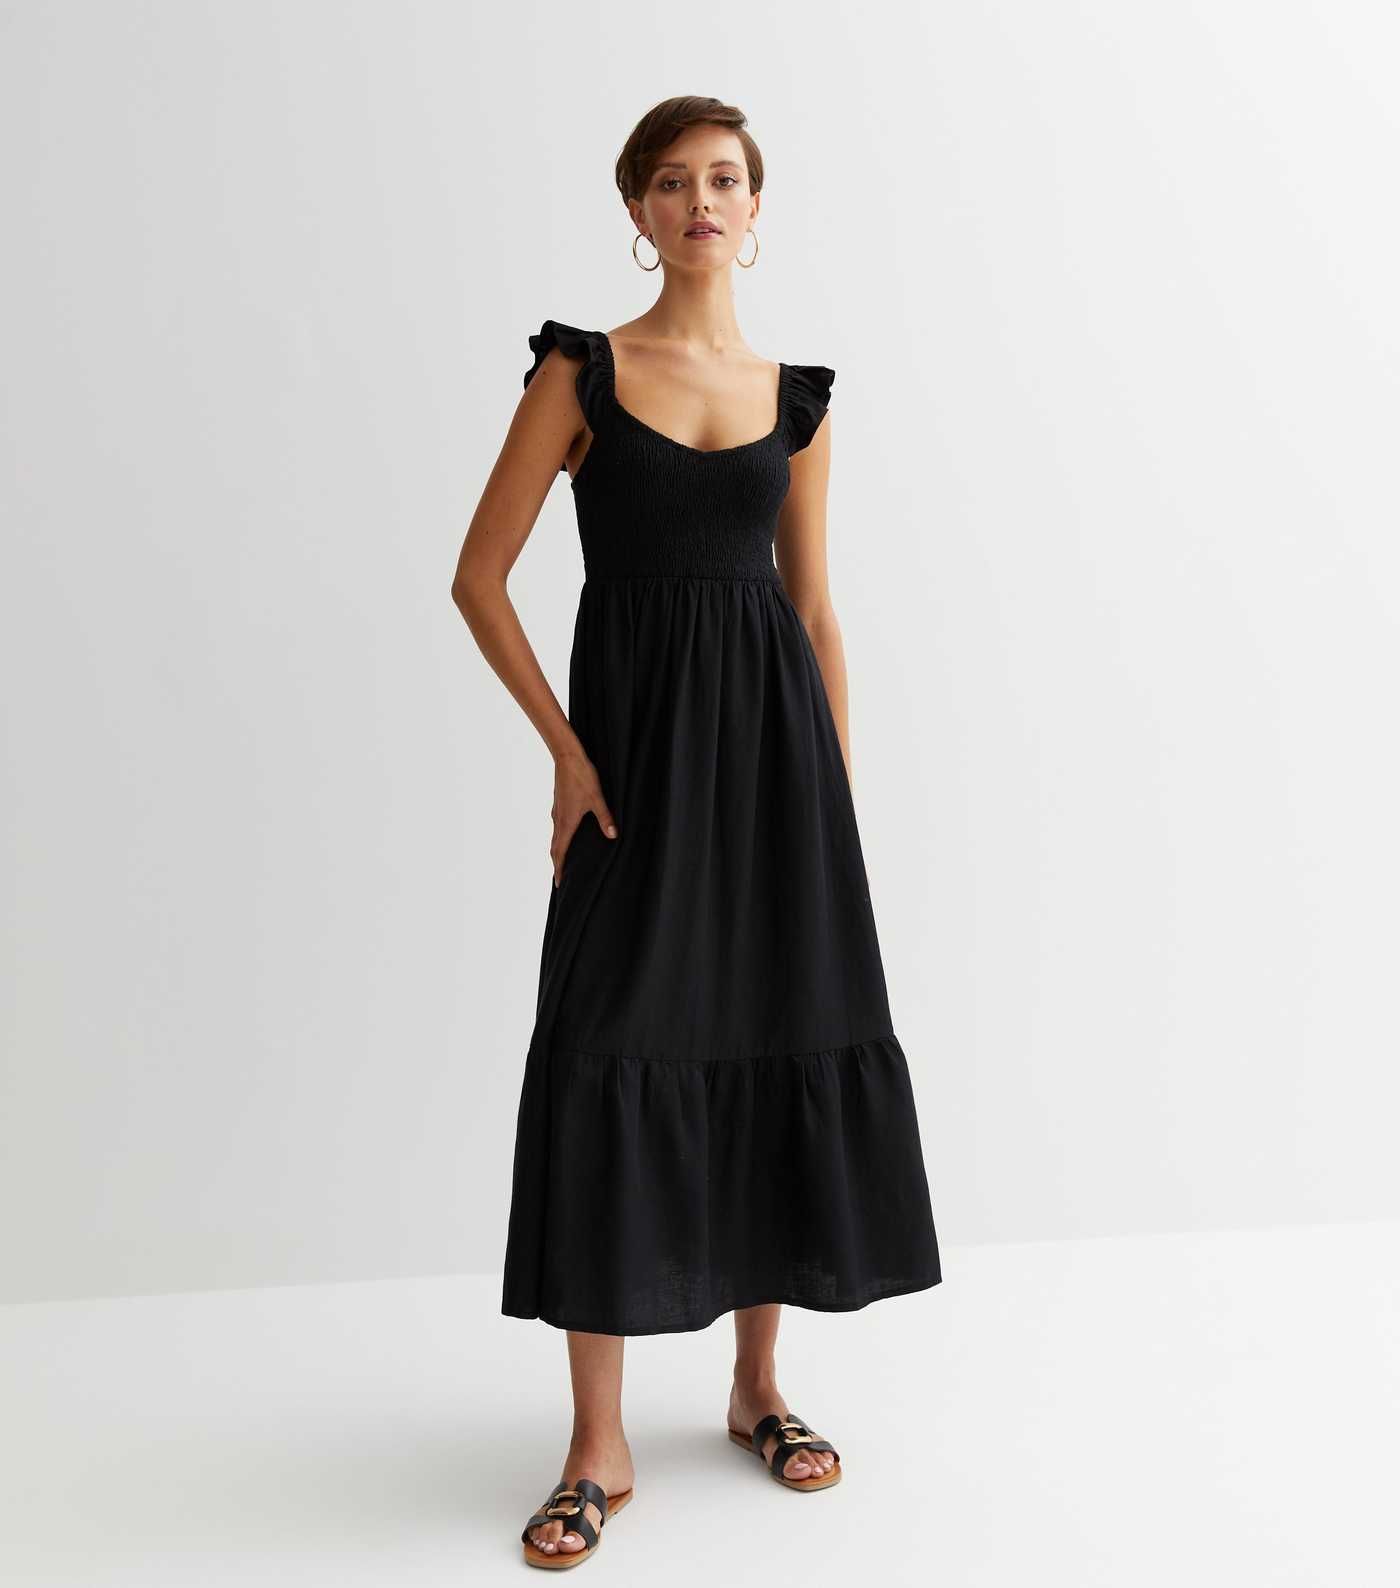 Black Shirred Frill Midi Dress
						
						Add to Saved Items
						Remove from Saved Items | New Look (UK)